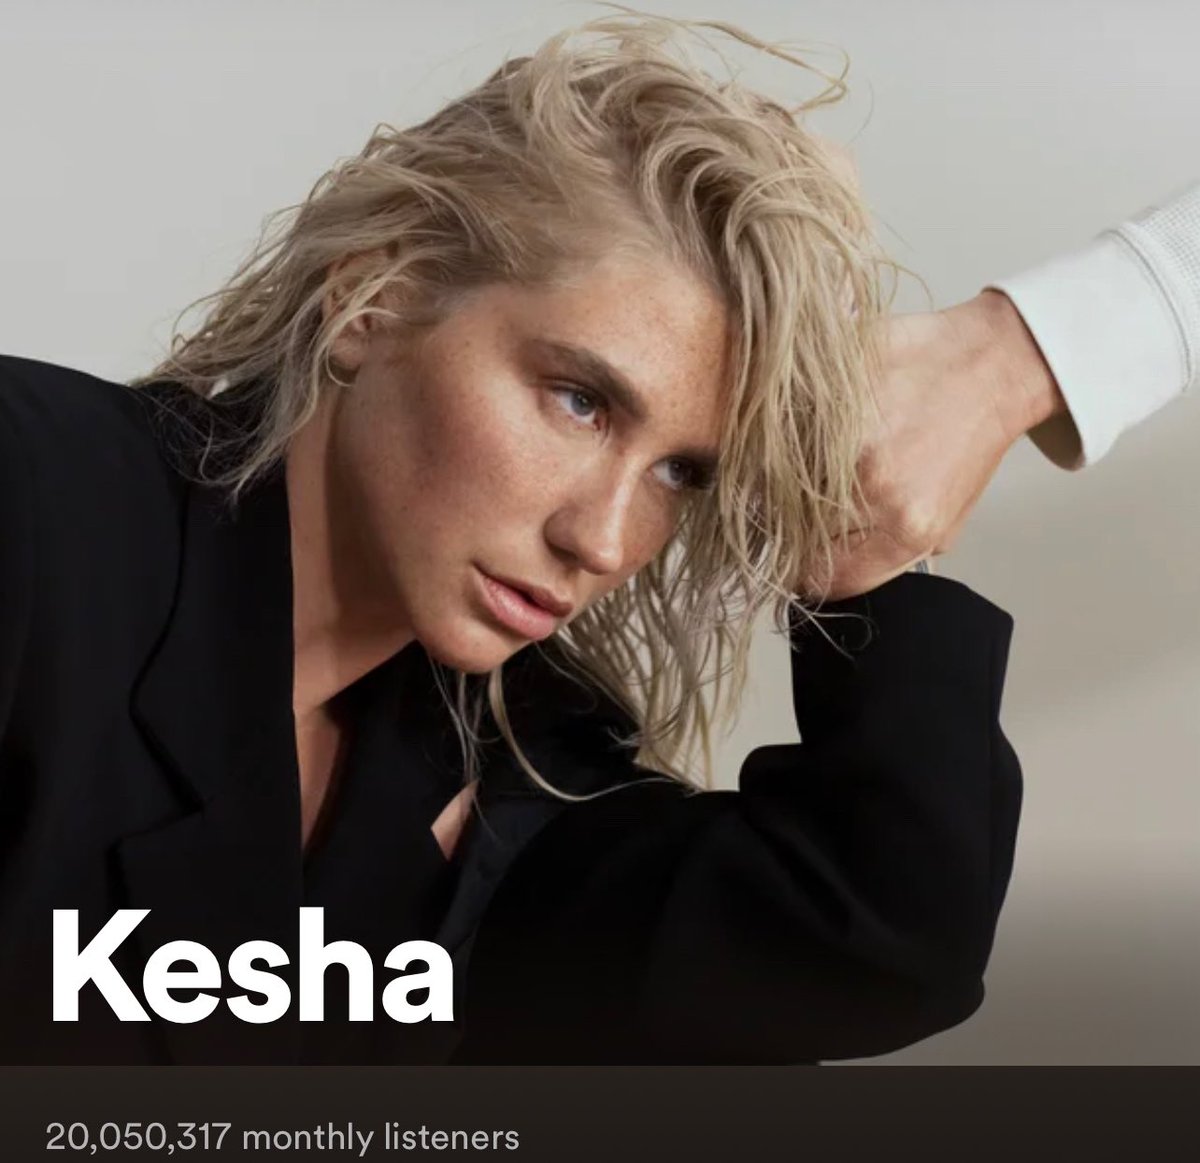 Kesha has now reached a new peak of 20,050,317 monthly Spotify listeners due to the release of #Gagorder